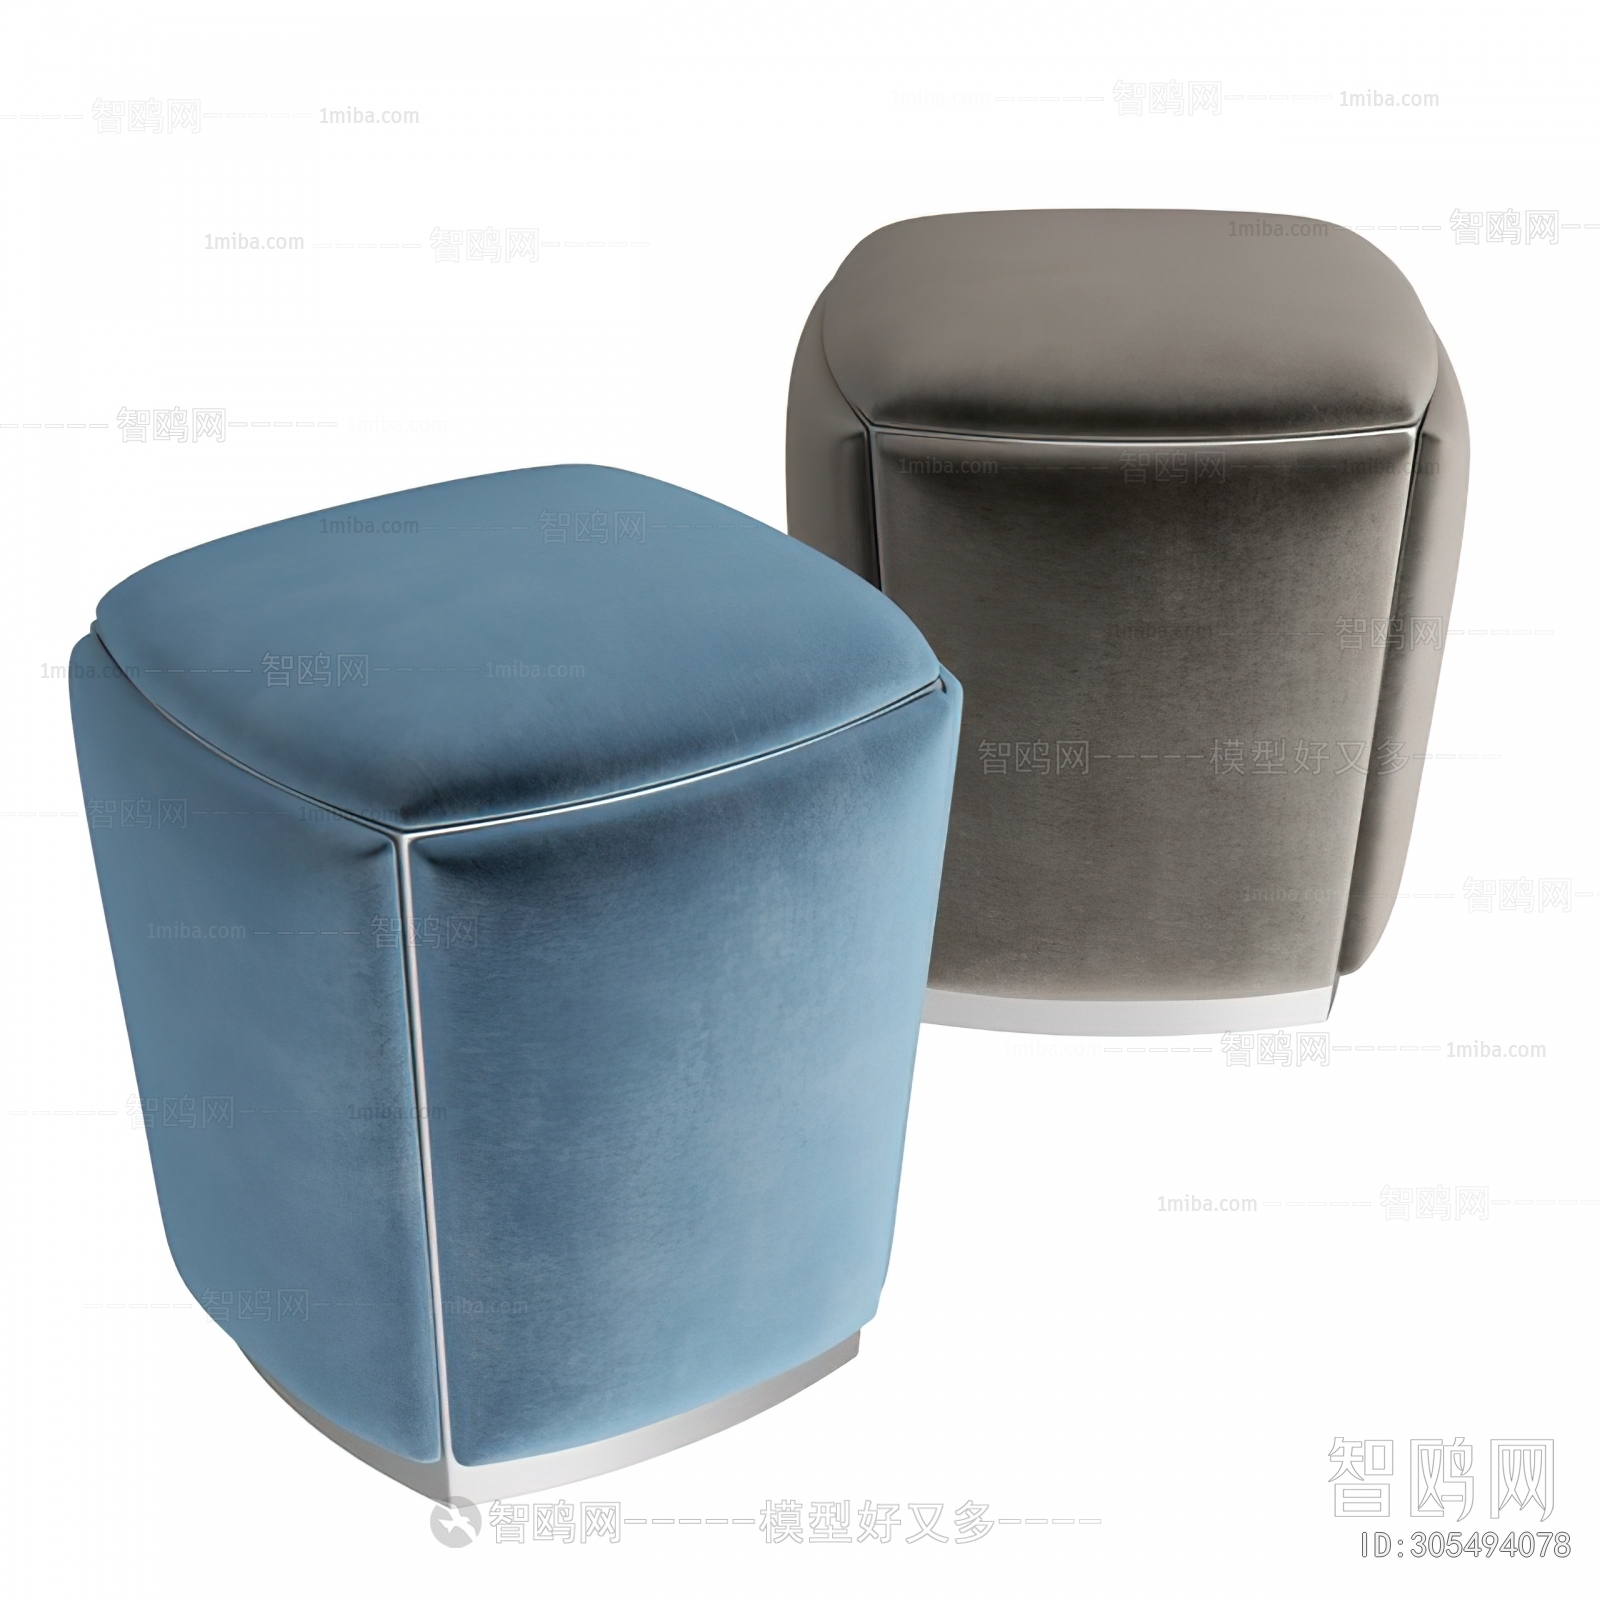 Modern Stool For Changing Shoes